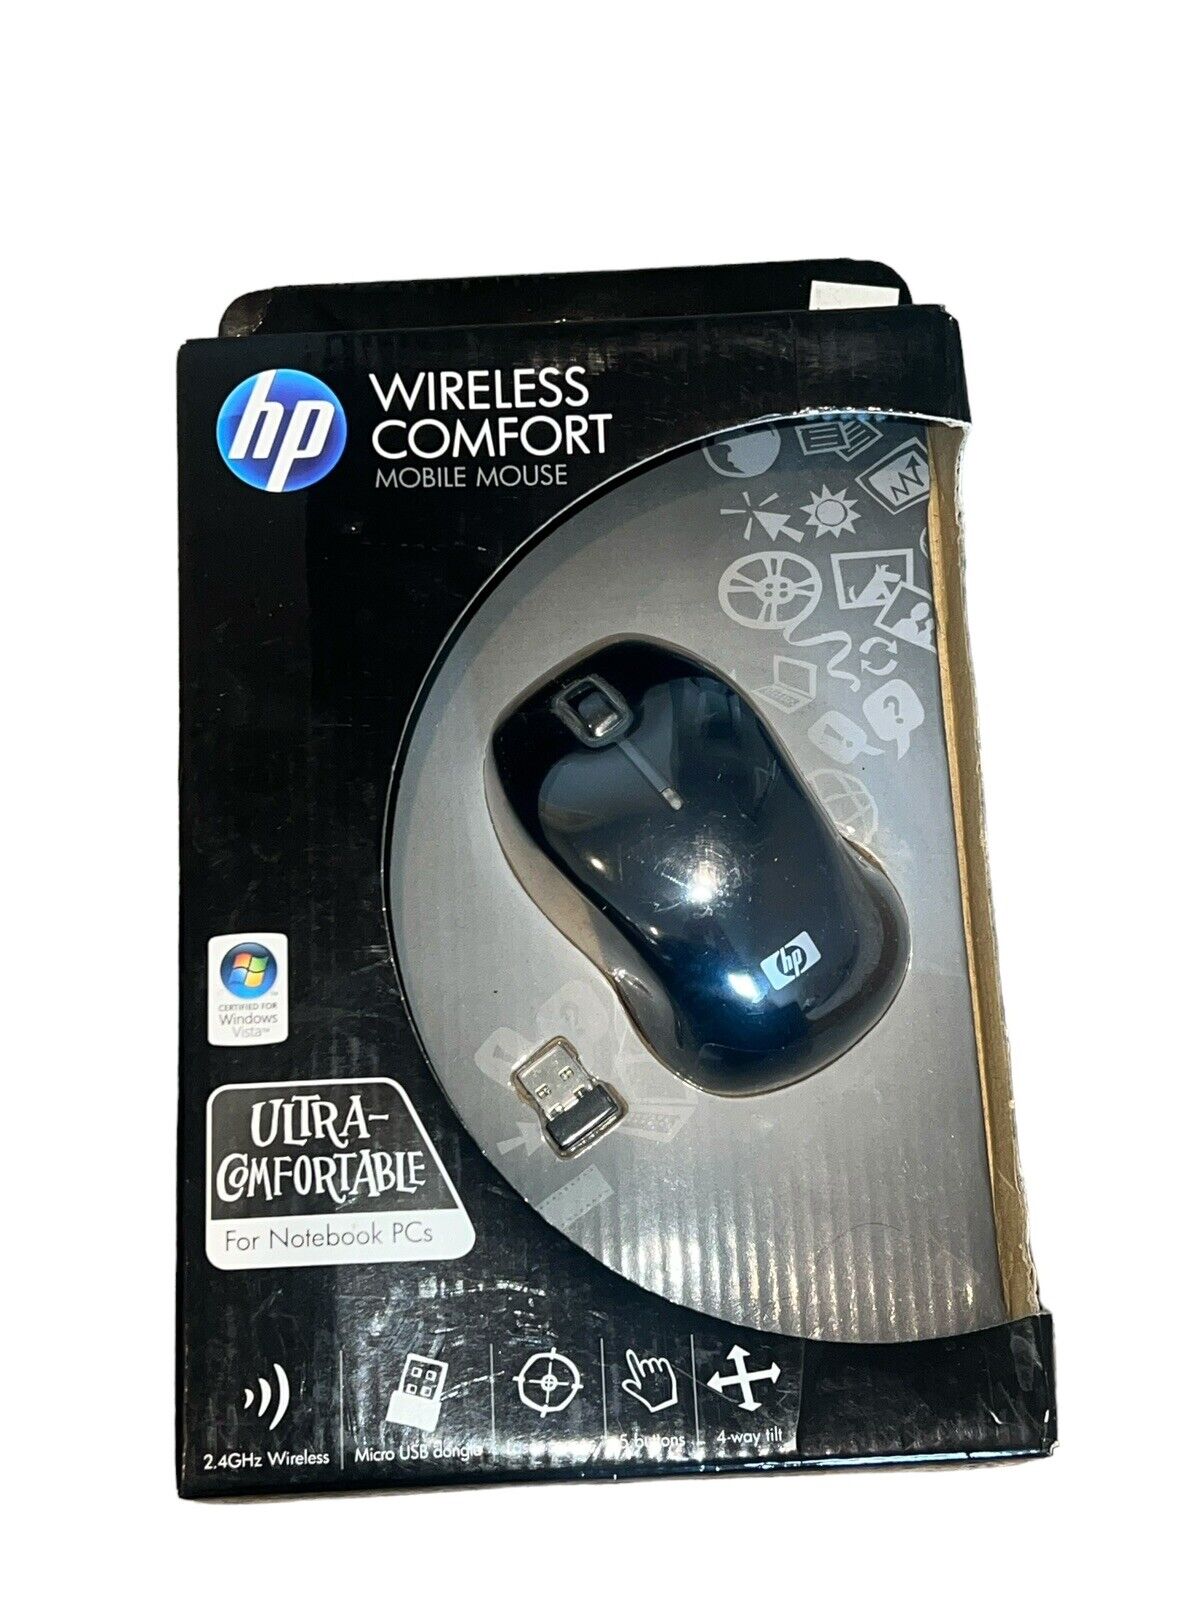 New HP 2.4GHz Wireless Optical Mobile Travel Mouse LB454AA For Laptops and PCs